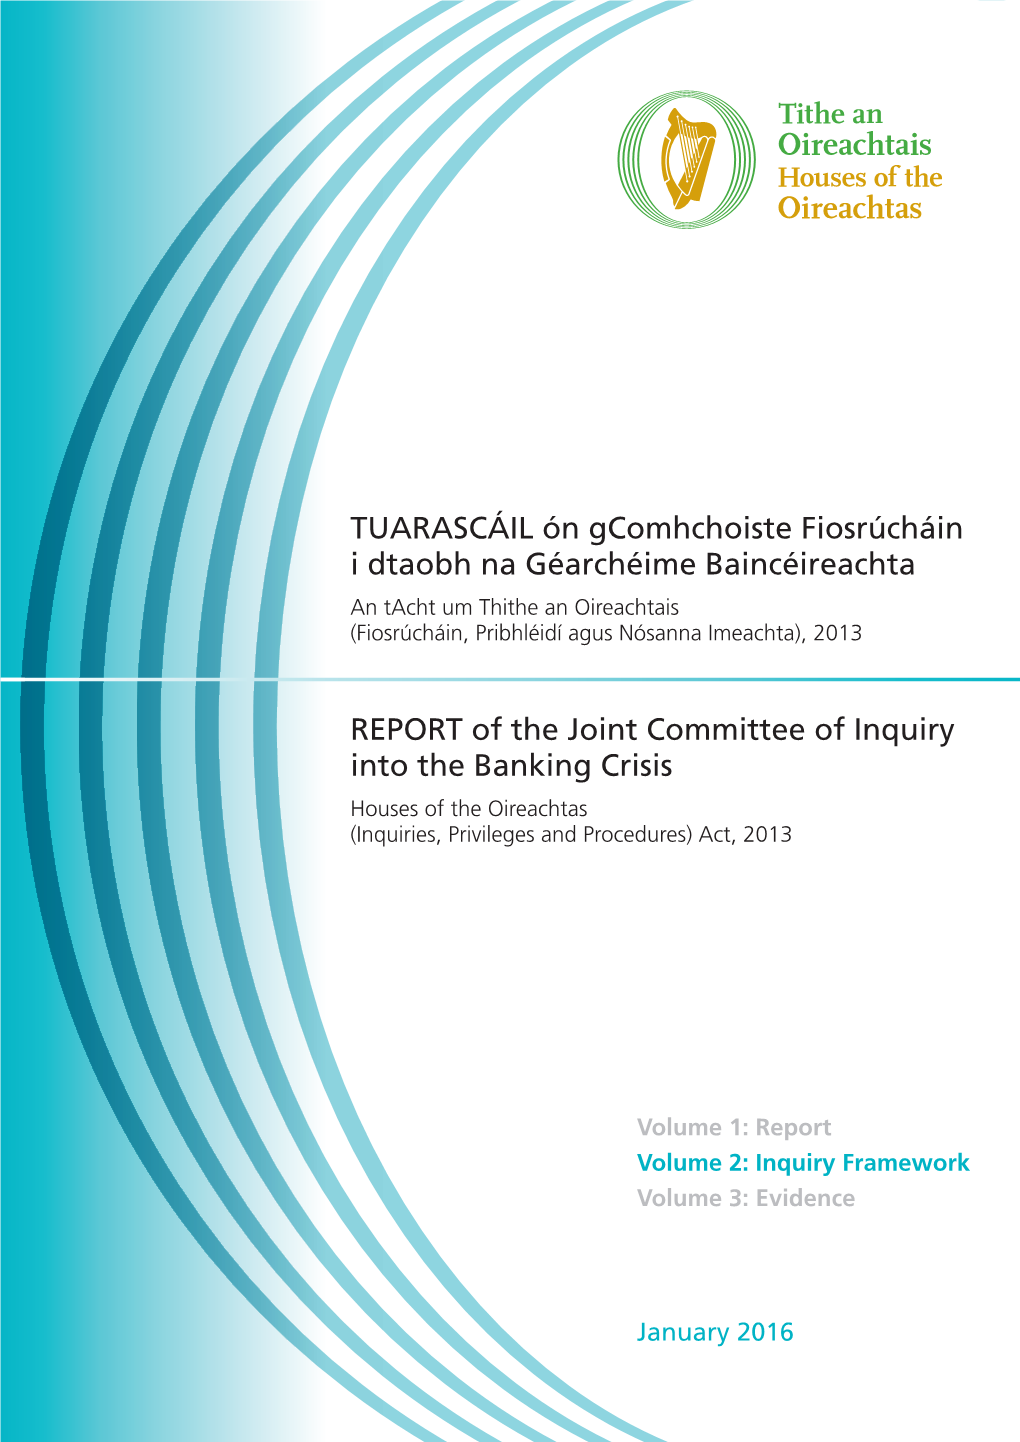 REPORT of the Joint Committee of Inquiry Into the Banking Crisis Houses of the Oireachtas (Inquiries, Privileges and Procedures) Act, 2013